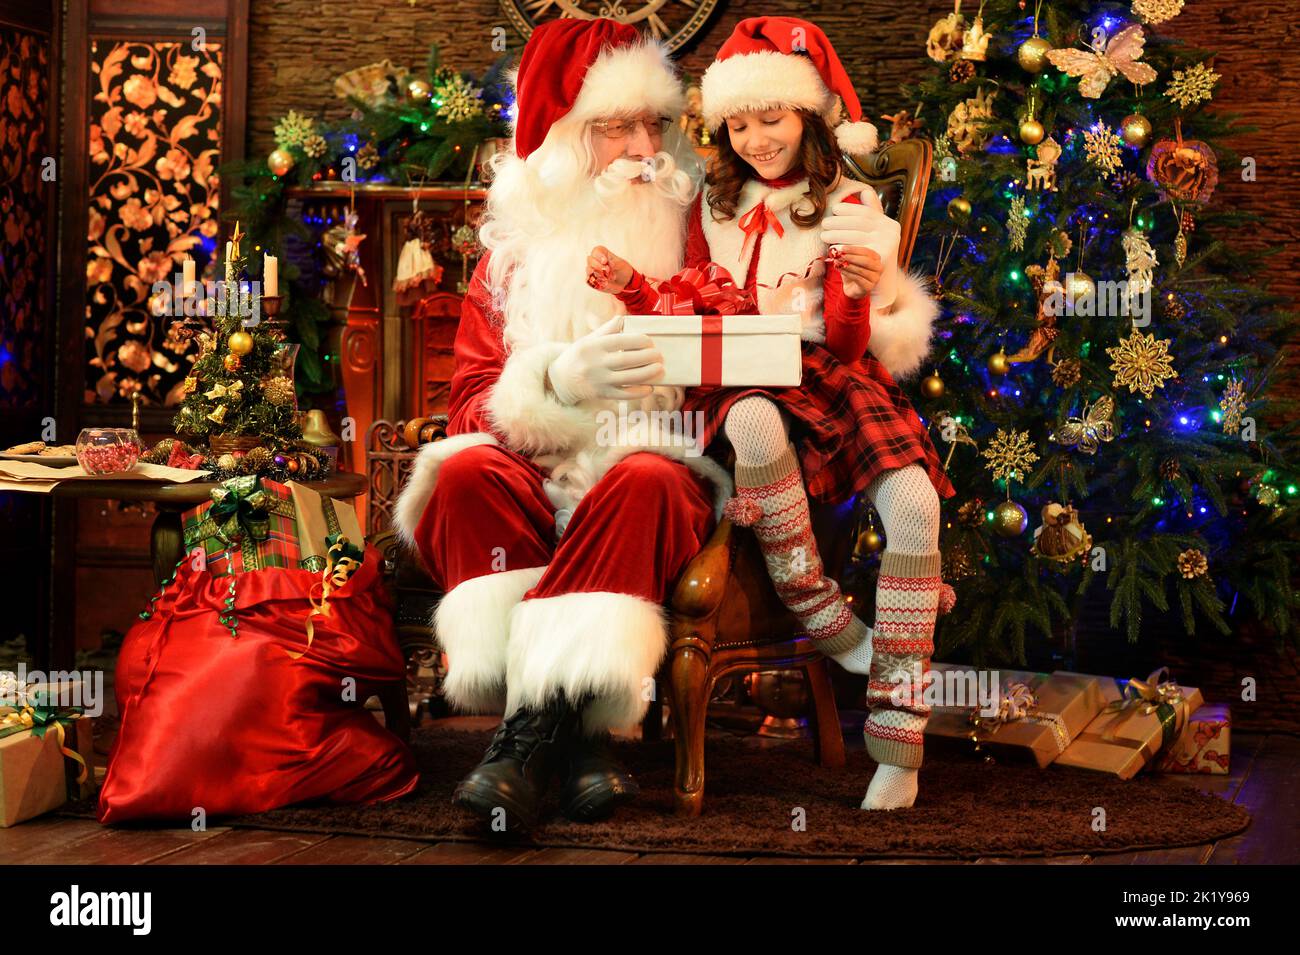 Santa Claus in a traditional costume with a girl in a room Stock Photo